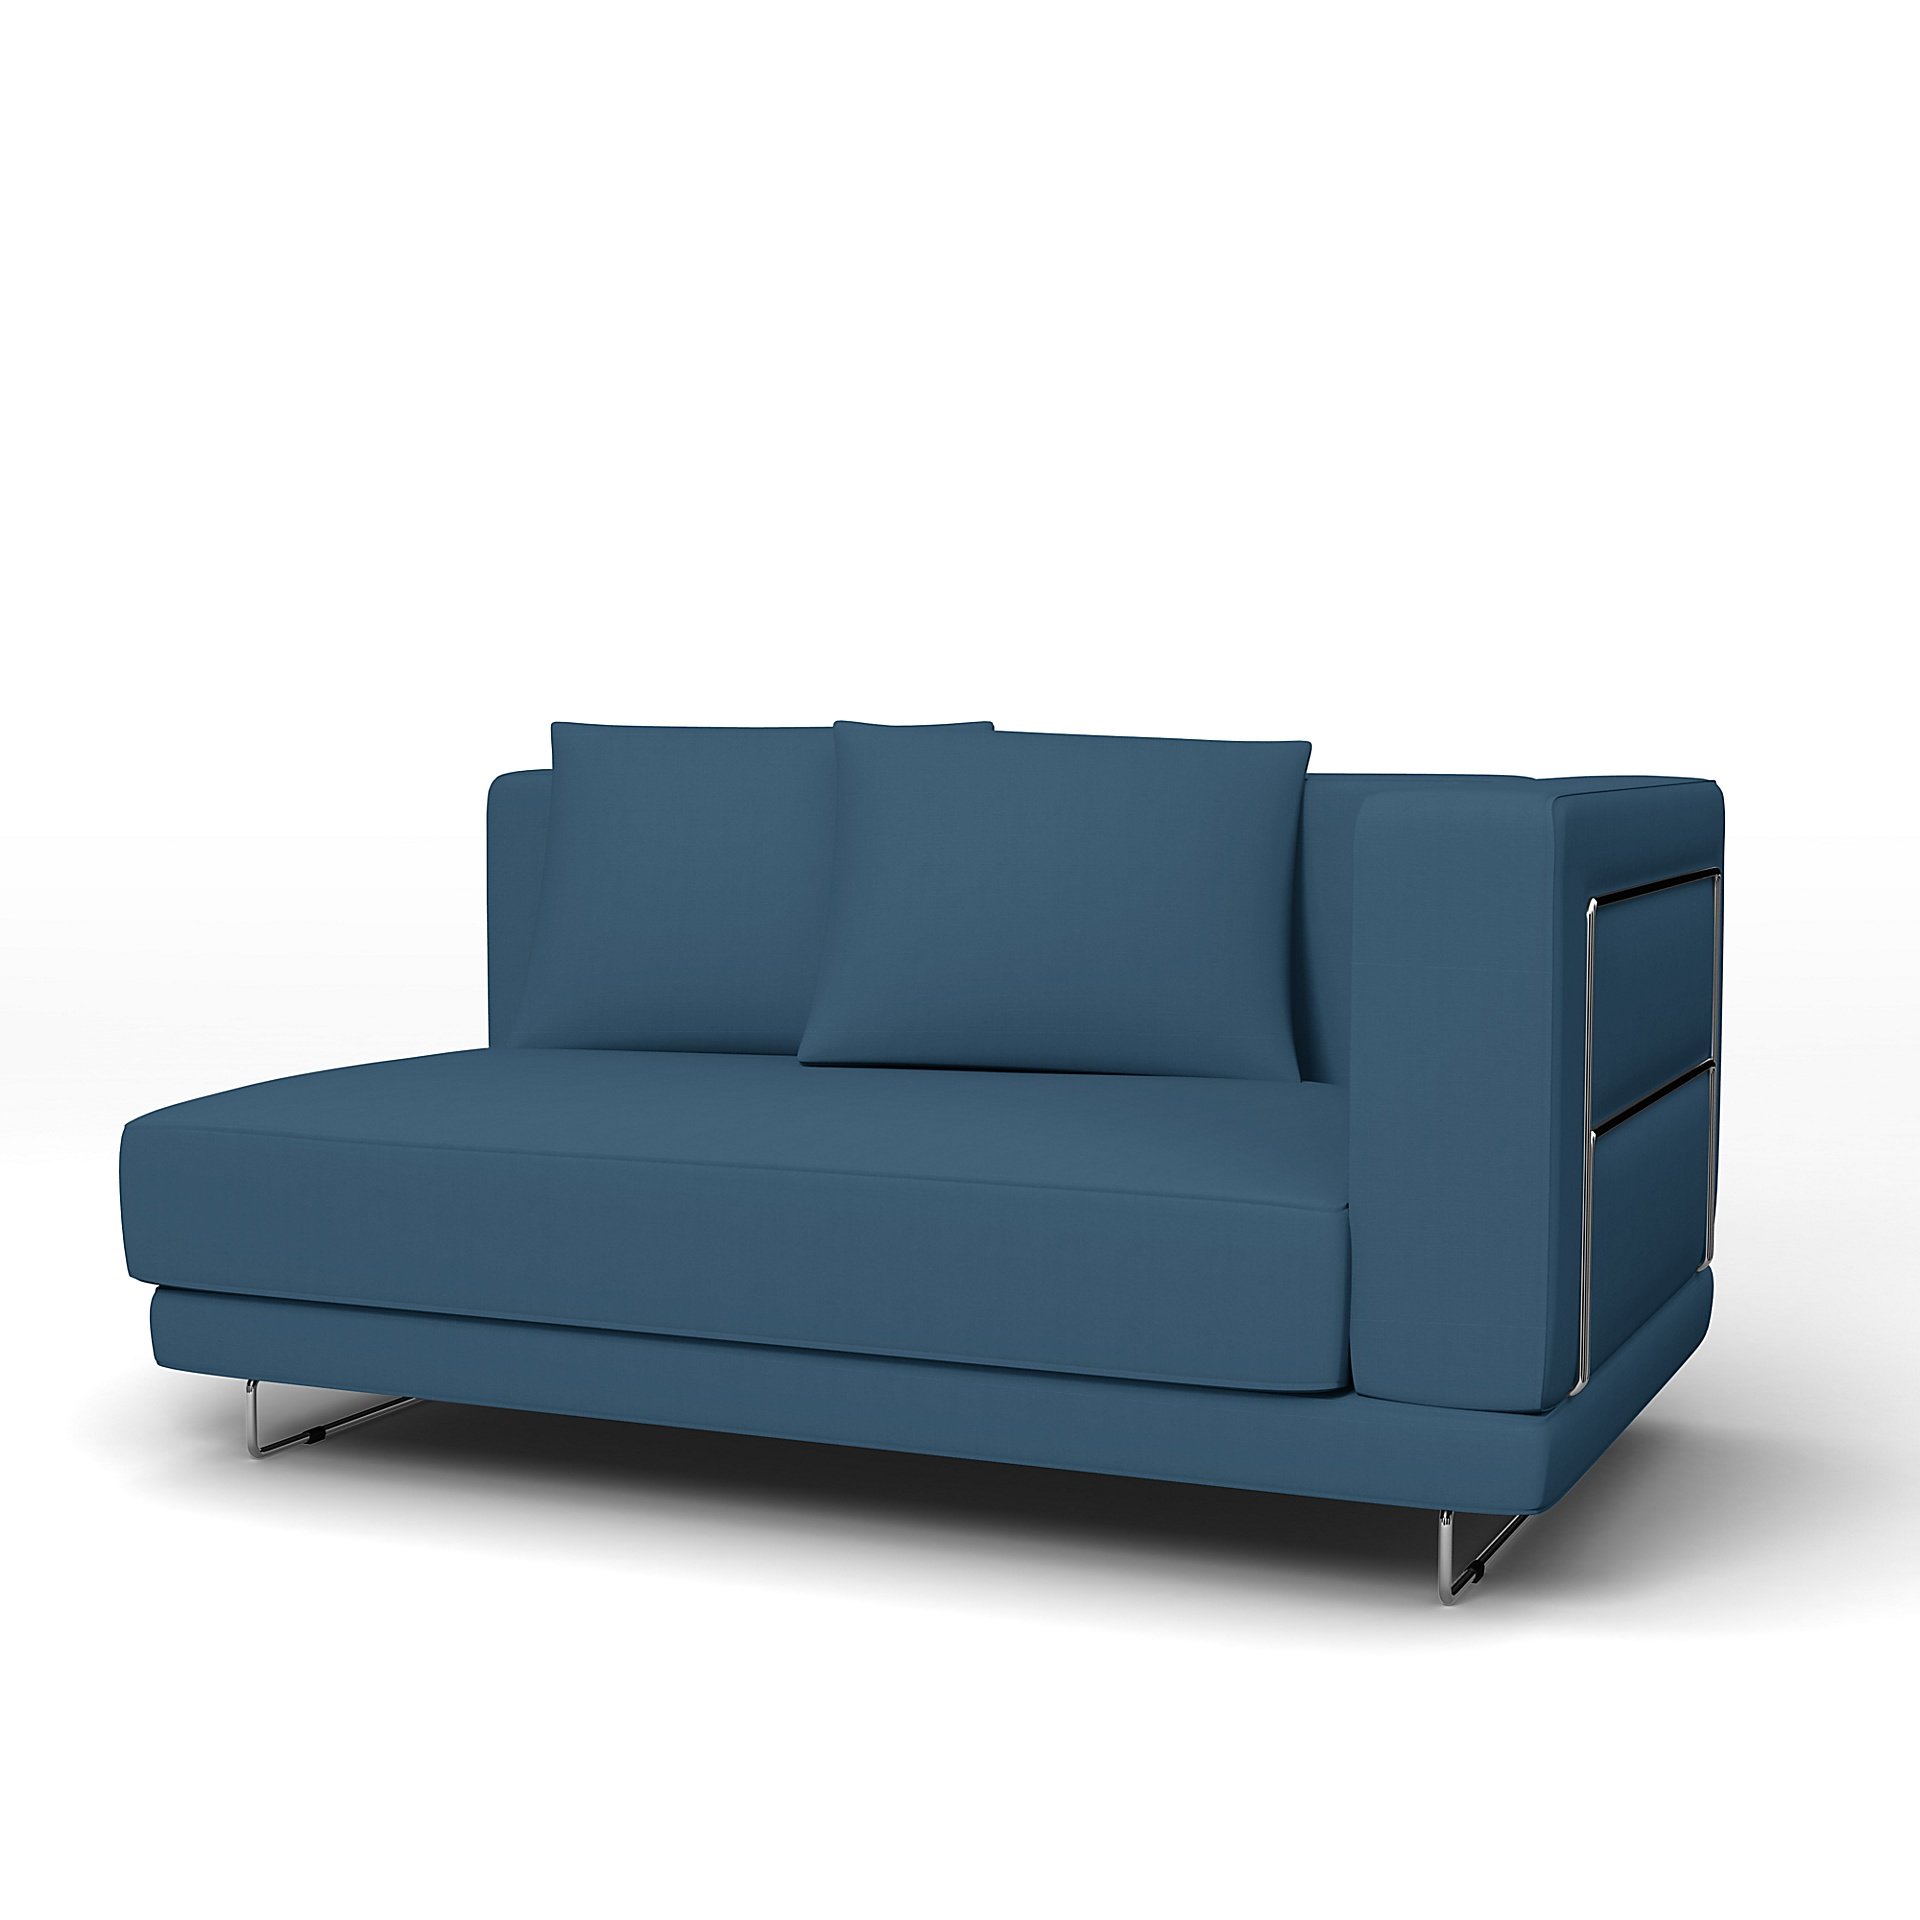 IKEA - Tylosand Sofa with Armrest Cover, Real Teal, Cotton - Bemz